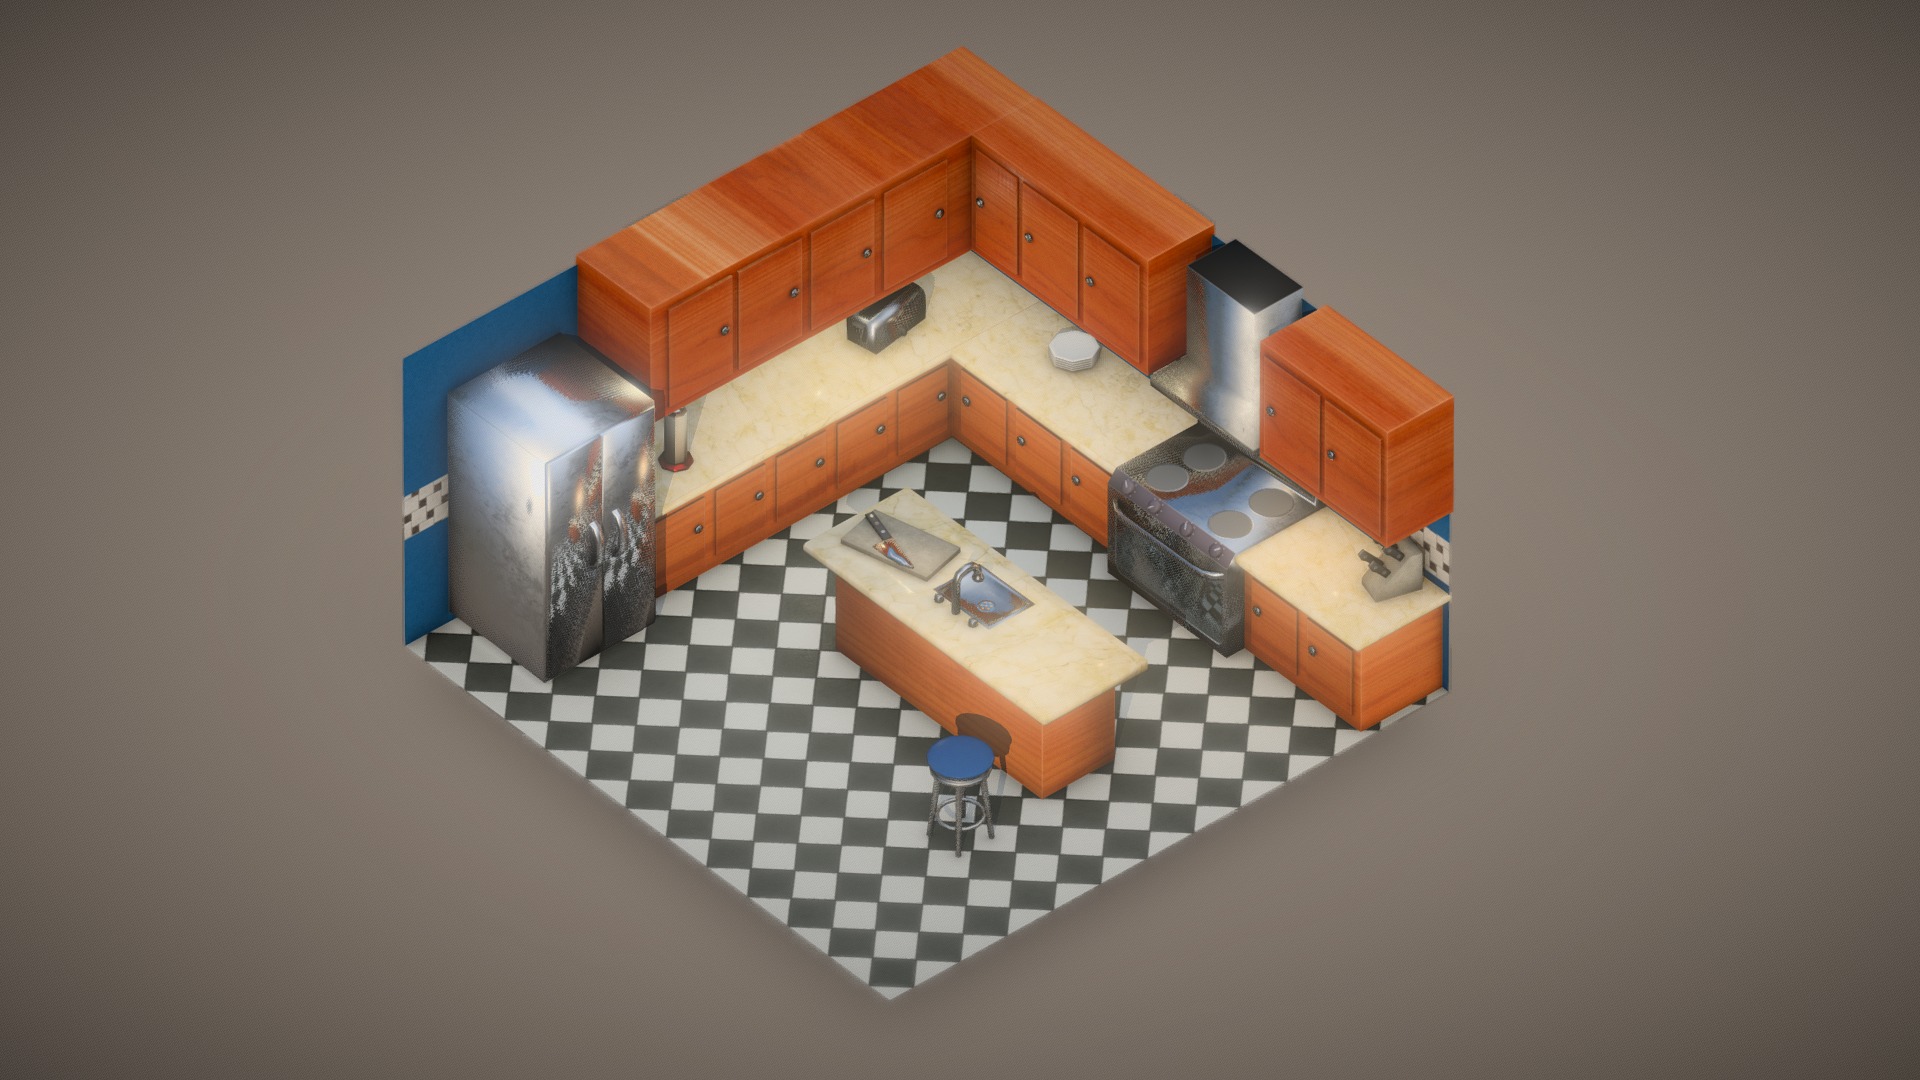 Took a lot longer than I expected because this week has been fairly crazy, but here's another in a series of isometric room dioramas. I still think I prefer how the first one turned out, the living room diorama. How bright and clean it was, and yet more flatly shaded. 

Modelled in Blender, Textured in Substance Painter

As Rendered from Blender:

 - Kitchen Diorama - 3D model by Blackhart 3d model